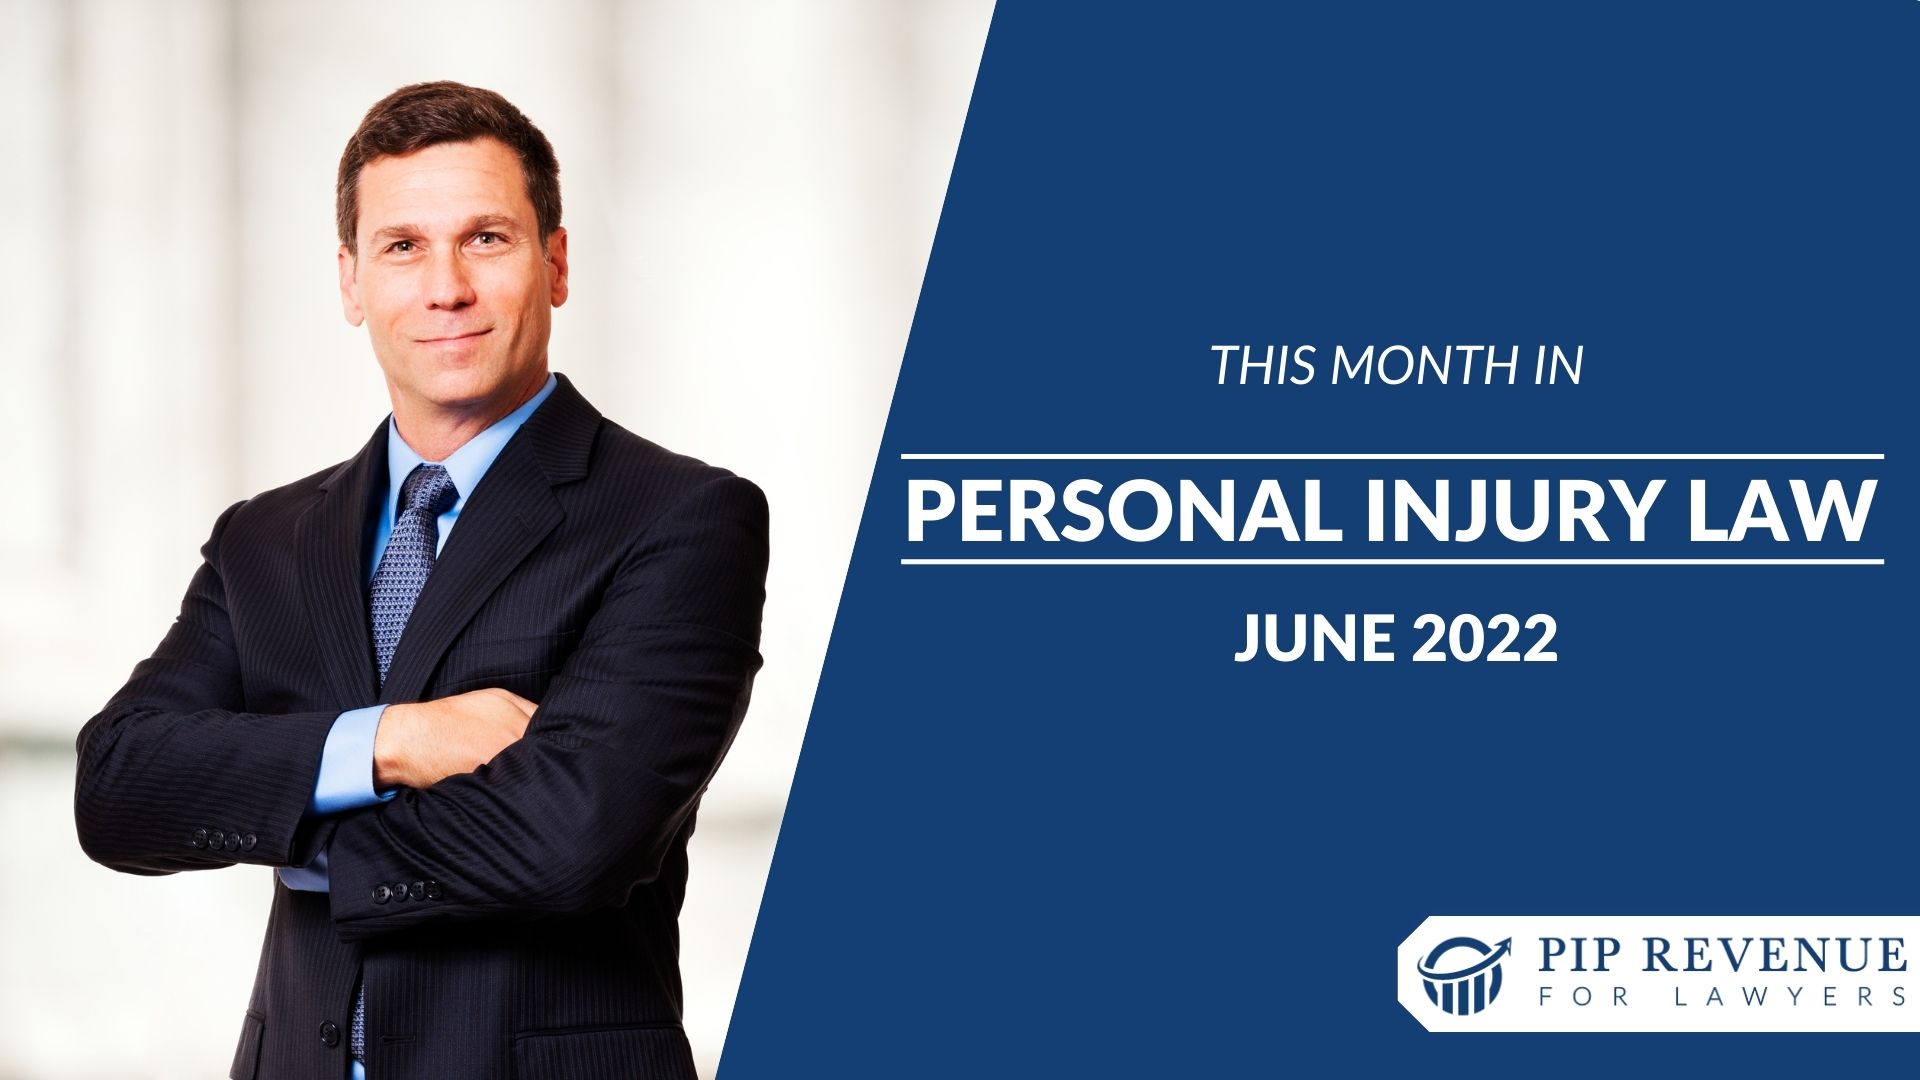 This Month in Personal Injury Law - June 2022